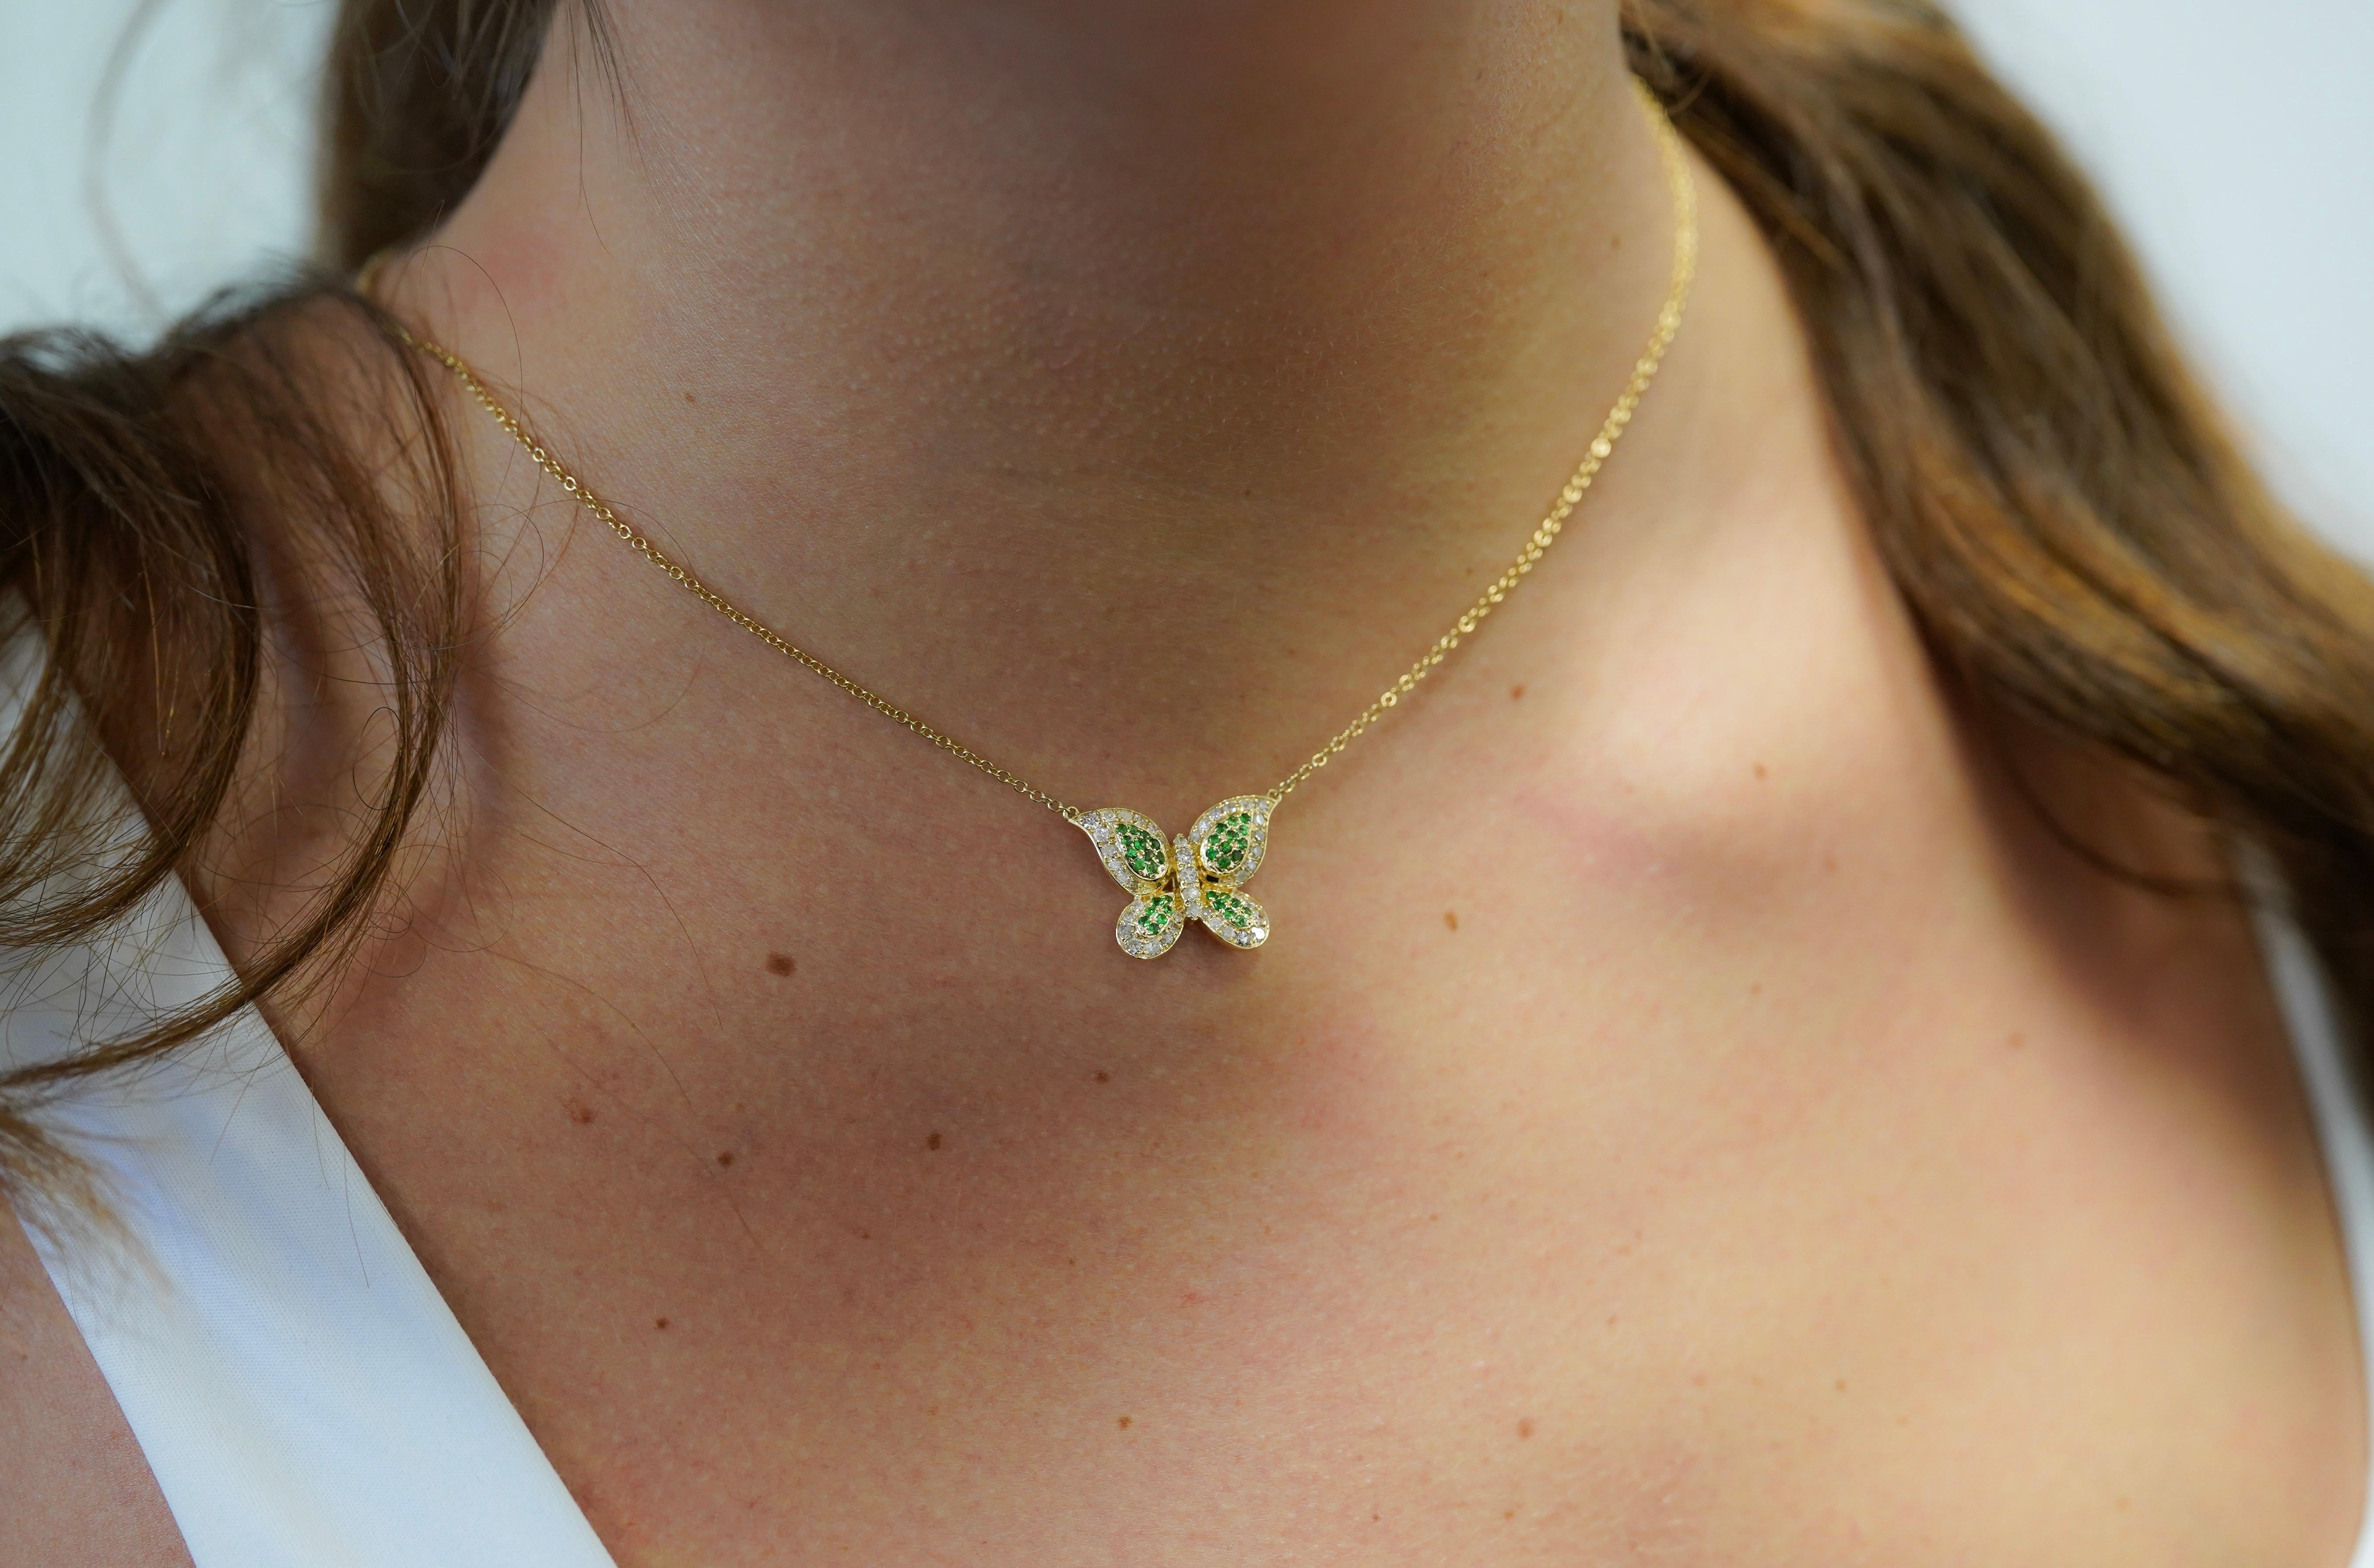 Presenting our stunning Natural Green Tsavorite and Diamond Butterfly Motif Pendant Necklace delicately cradled within the radiant glow of 14K Yellow Gold.

This pendant showcases vibrant round-cut green tsavorite wings, meticulously secured with a